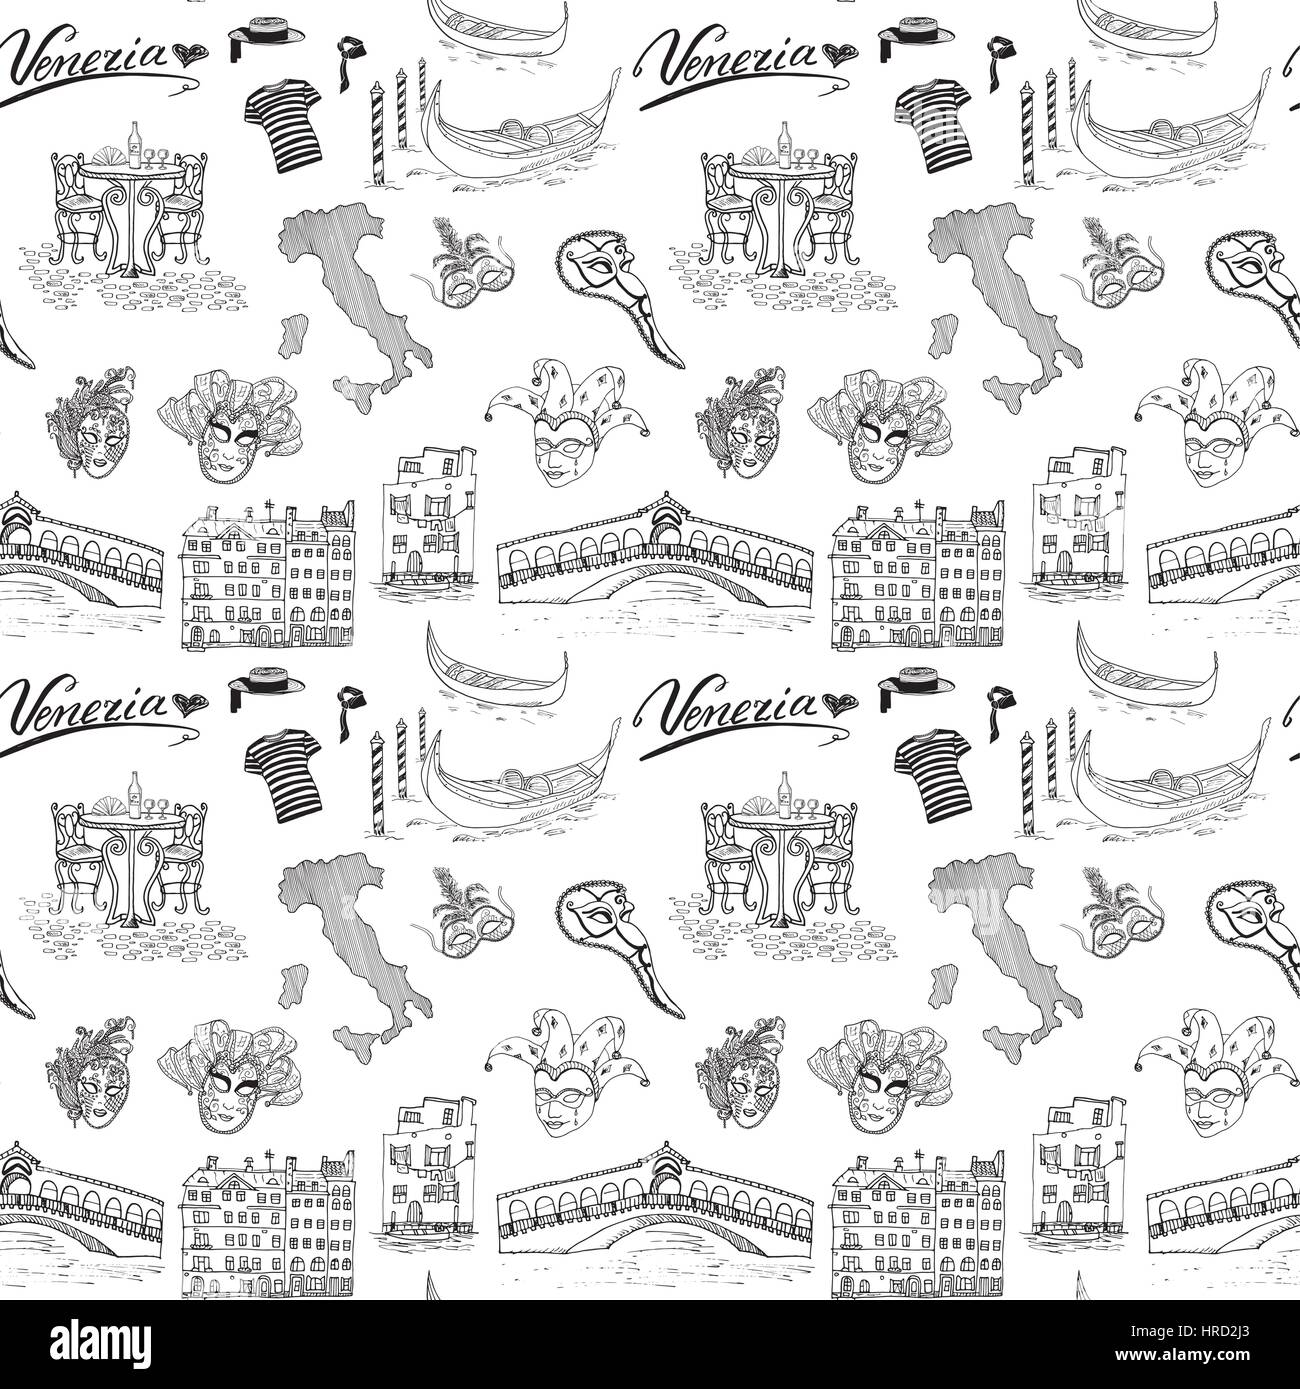 Venice Italy seamless pattern. Hand drawn sketch with map of Italy, gondolas, gondolier clothes, carnival venetian masks, houses, market bridge, cafe  Stock Vector